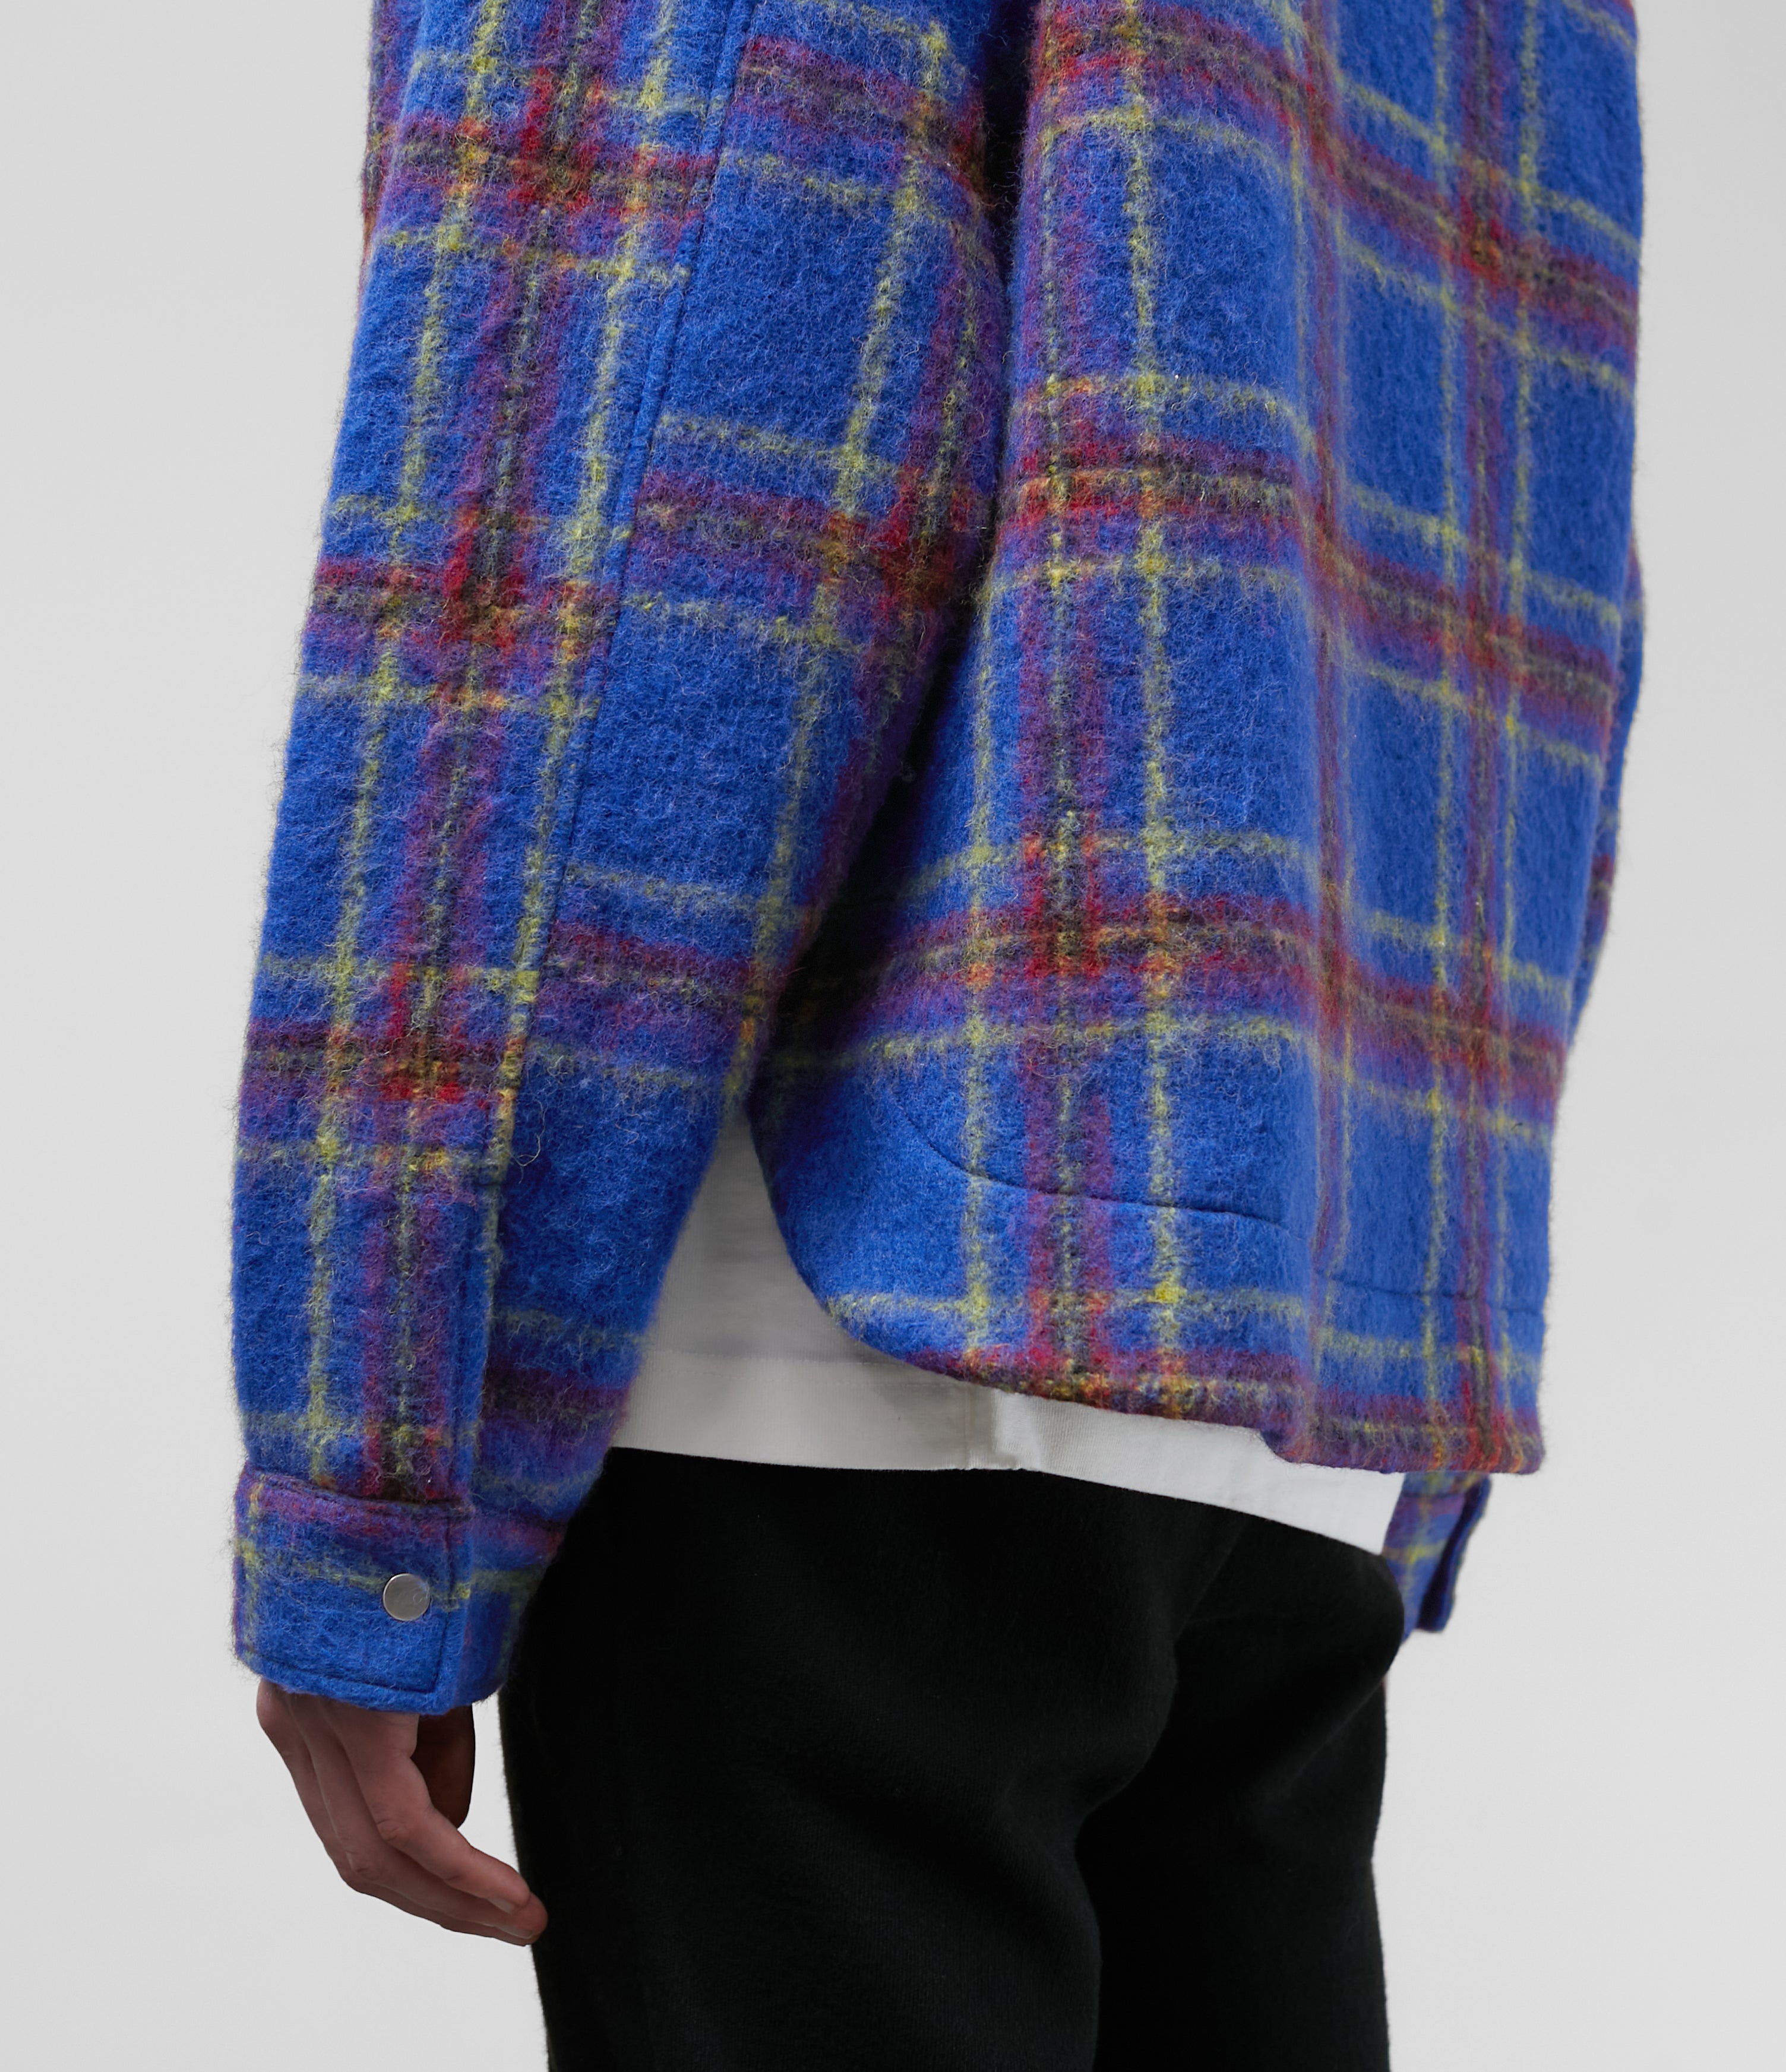 FLANNEL OVERSHIRT – Cole Buxton